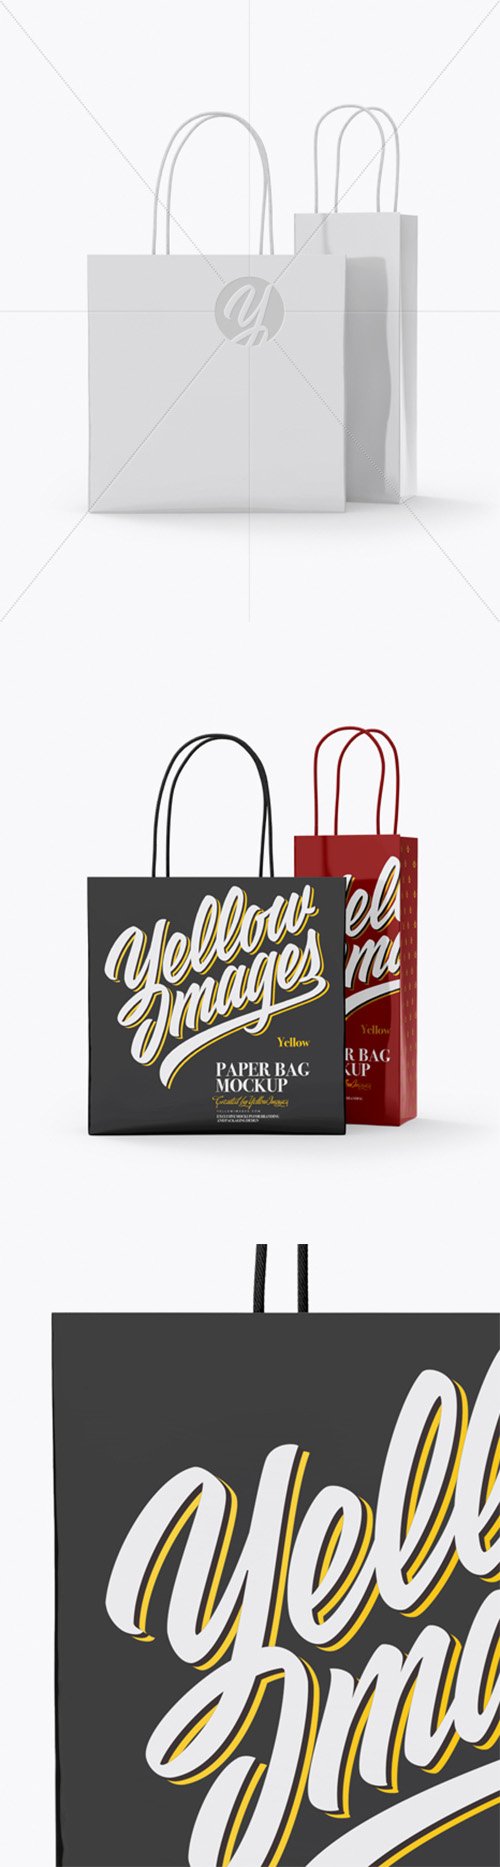 Two Glossy Paper Bags Mockup - Half Side View 27793 TIF